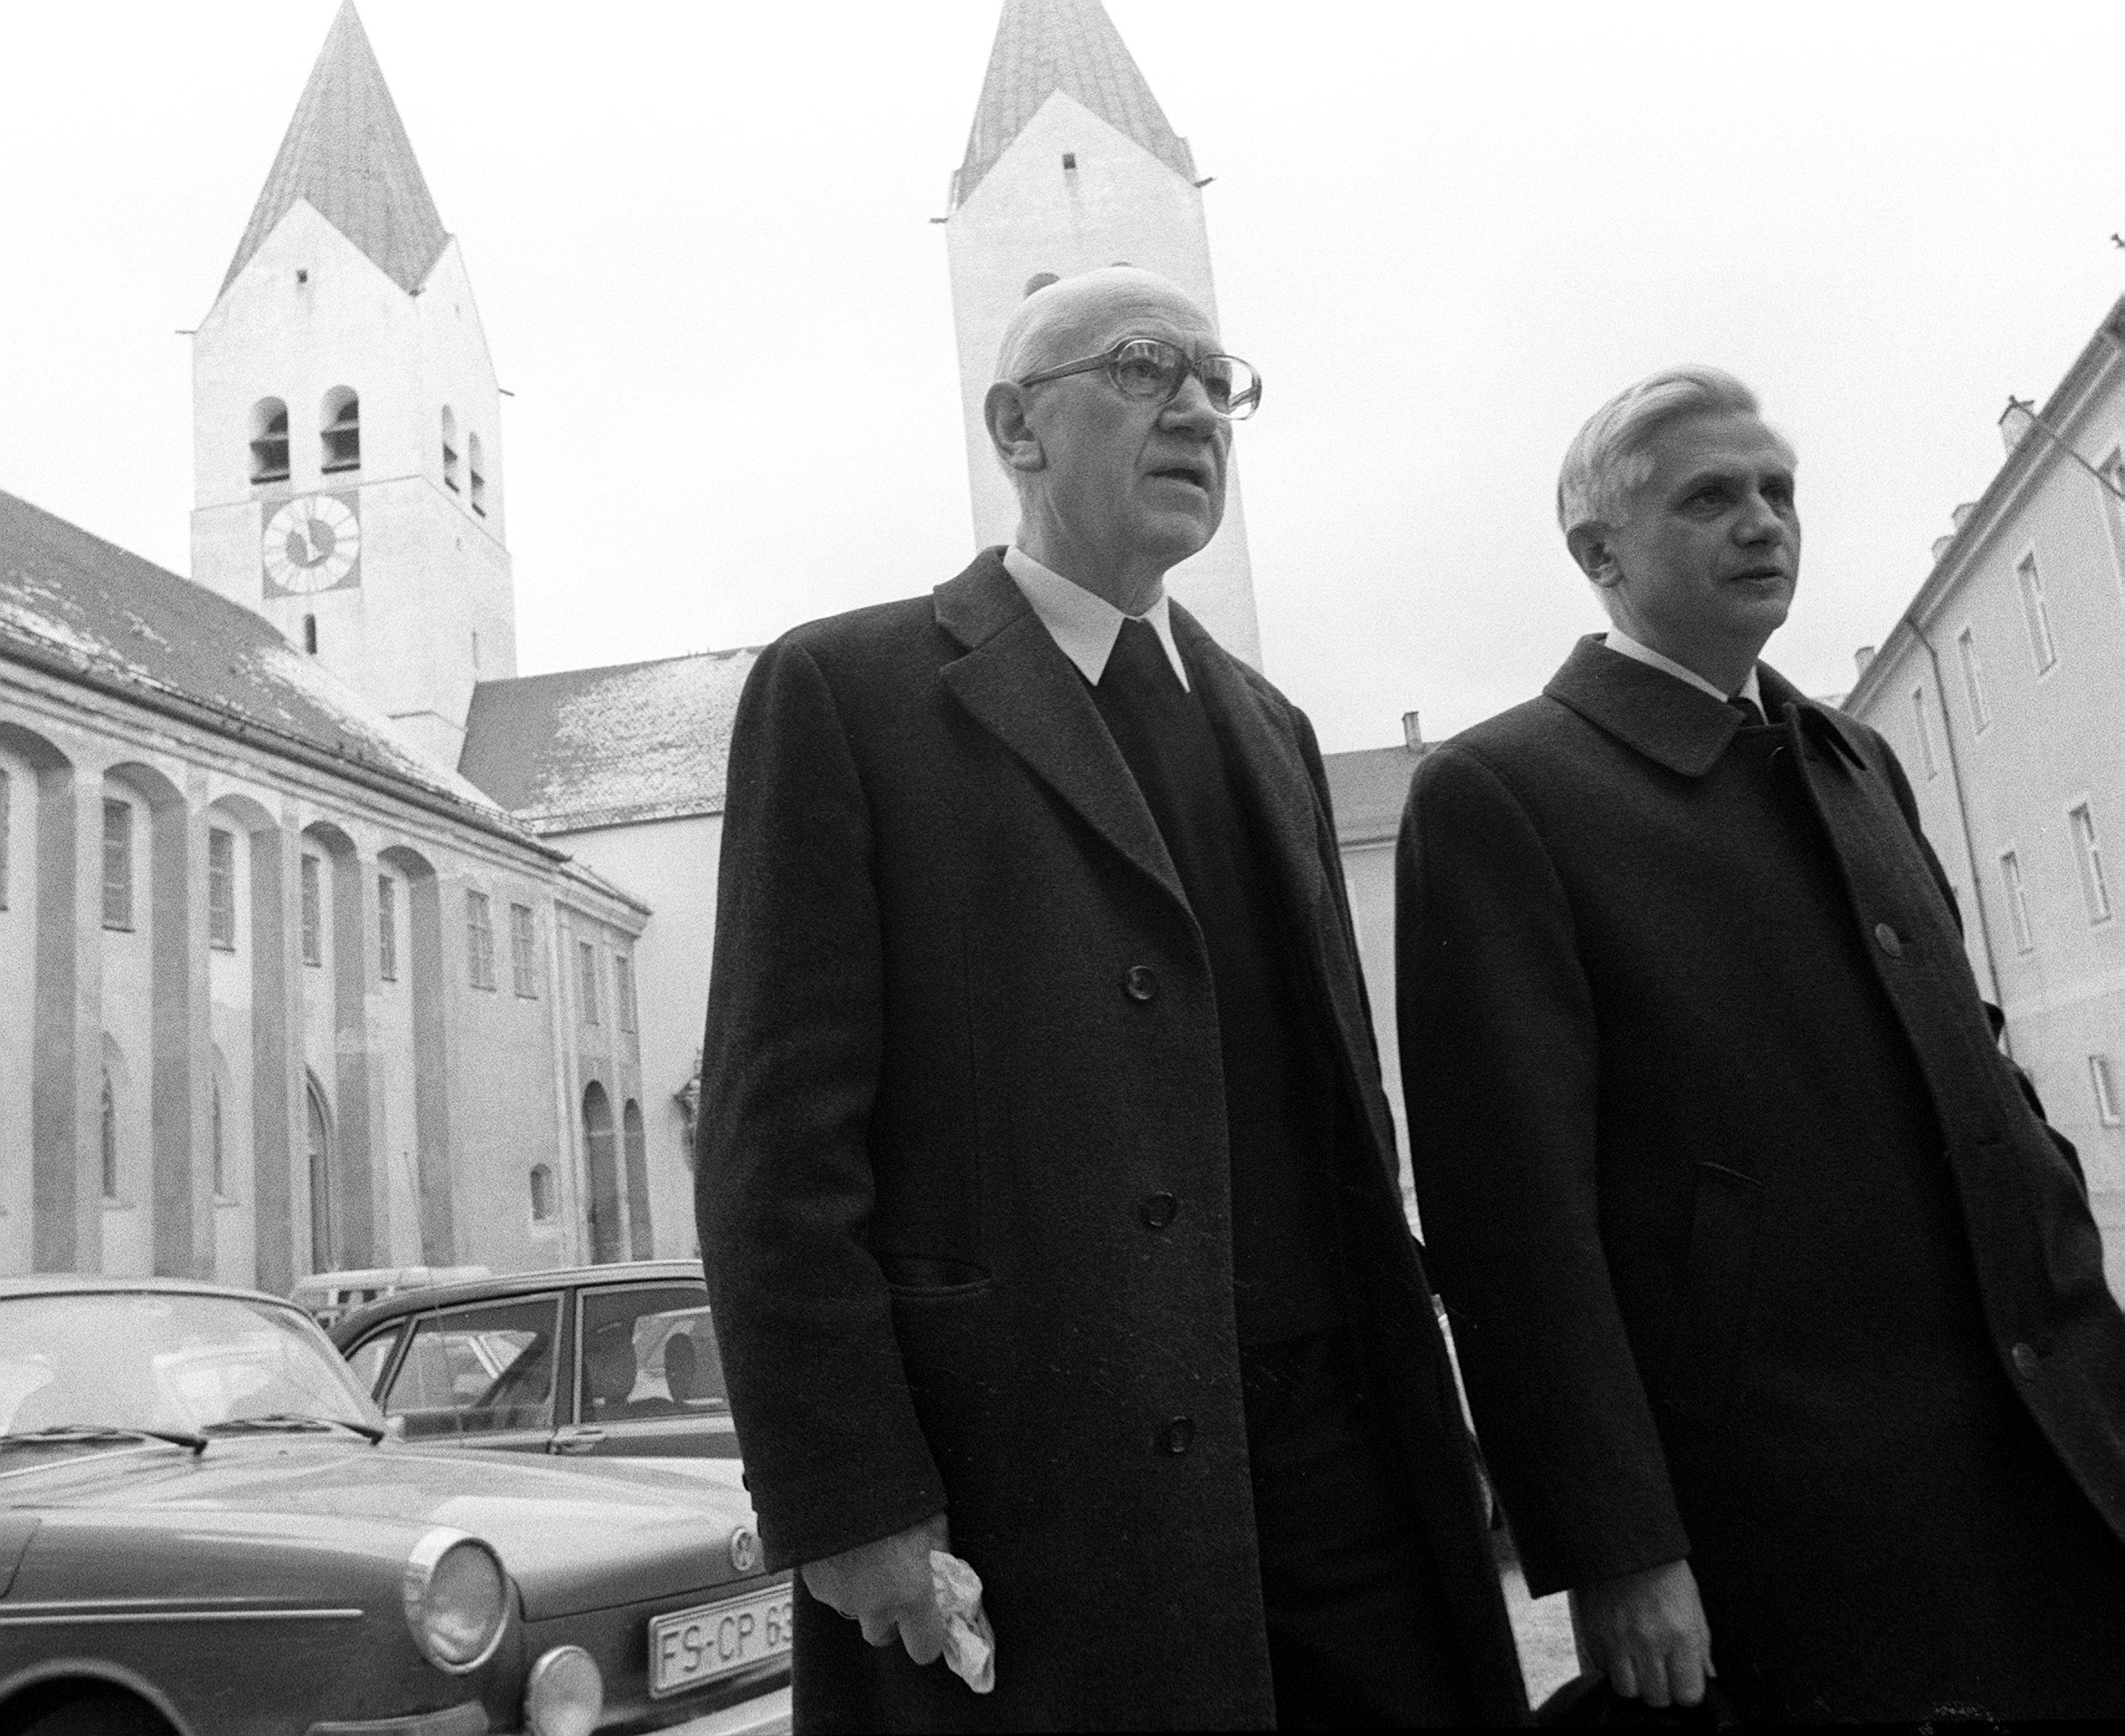 Newly nominated Archbishop of Munich and Freising, Joseph Ratzinger, right, walks with bishop Ernst Tewes in front of the cathedral of Freising, March 31, 1977 (AP Photo/Dieter Endlicher).